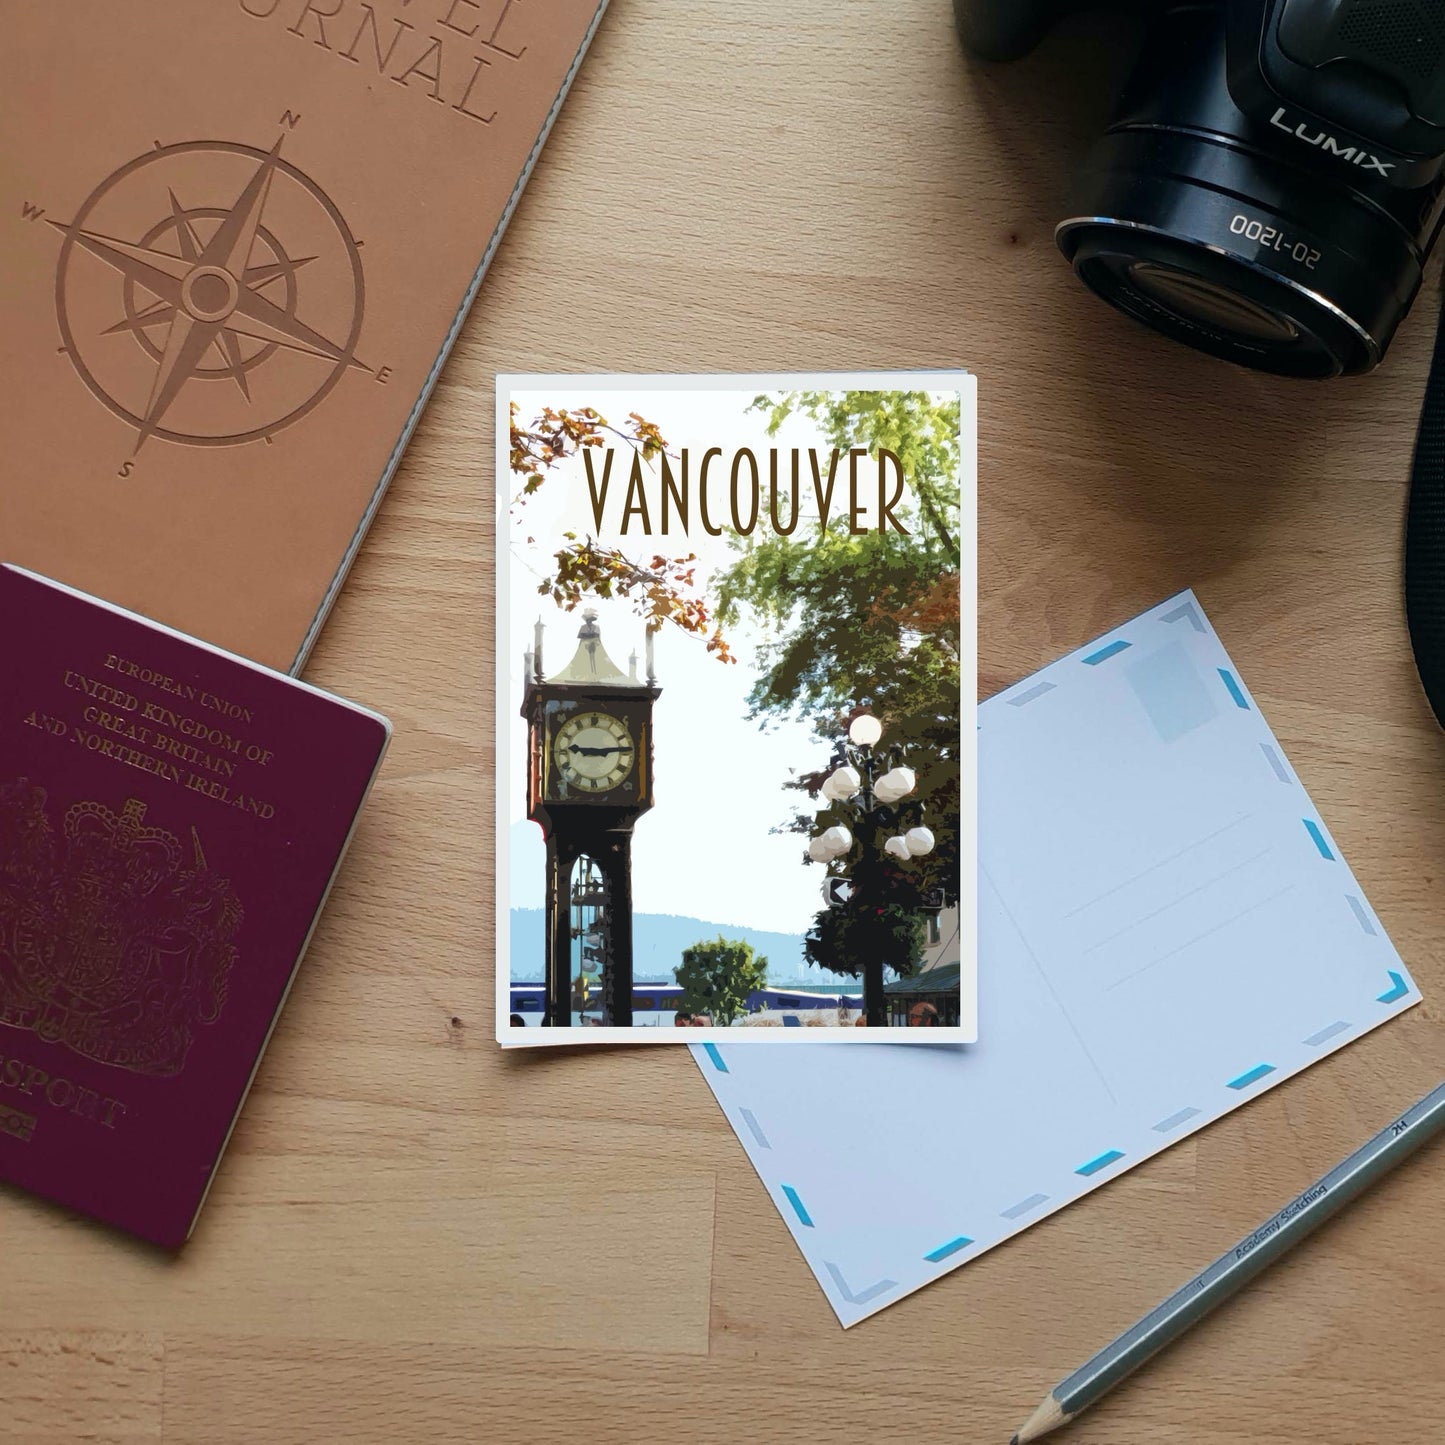 Vancouver Travel Poster